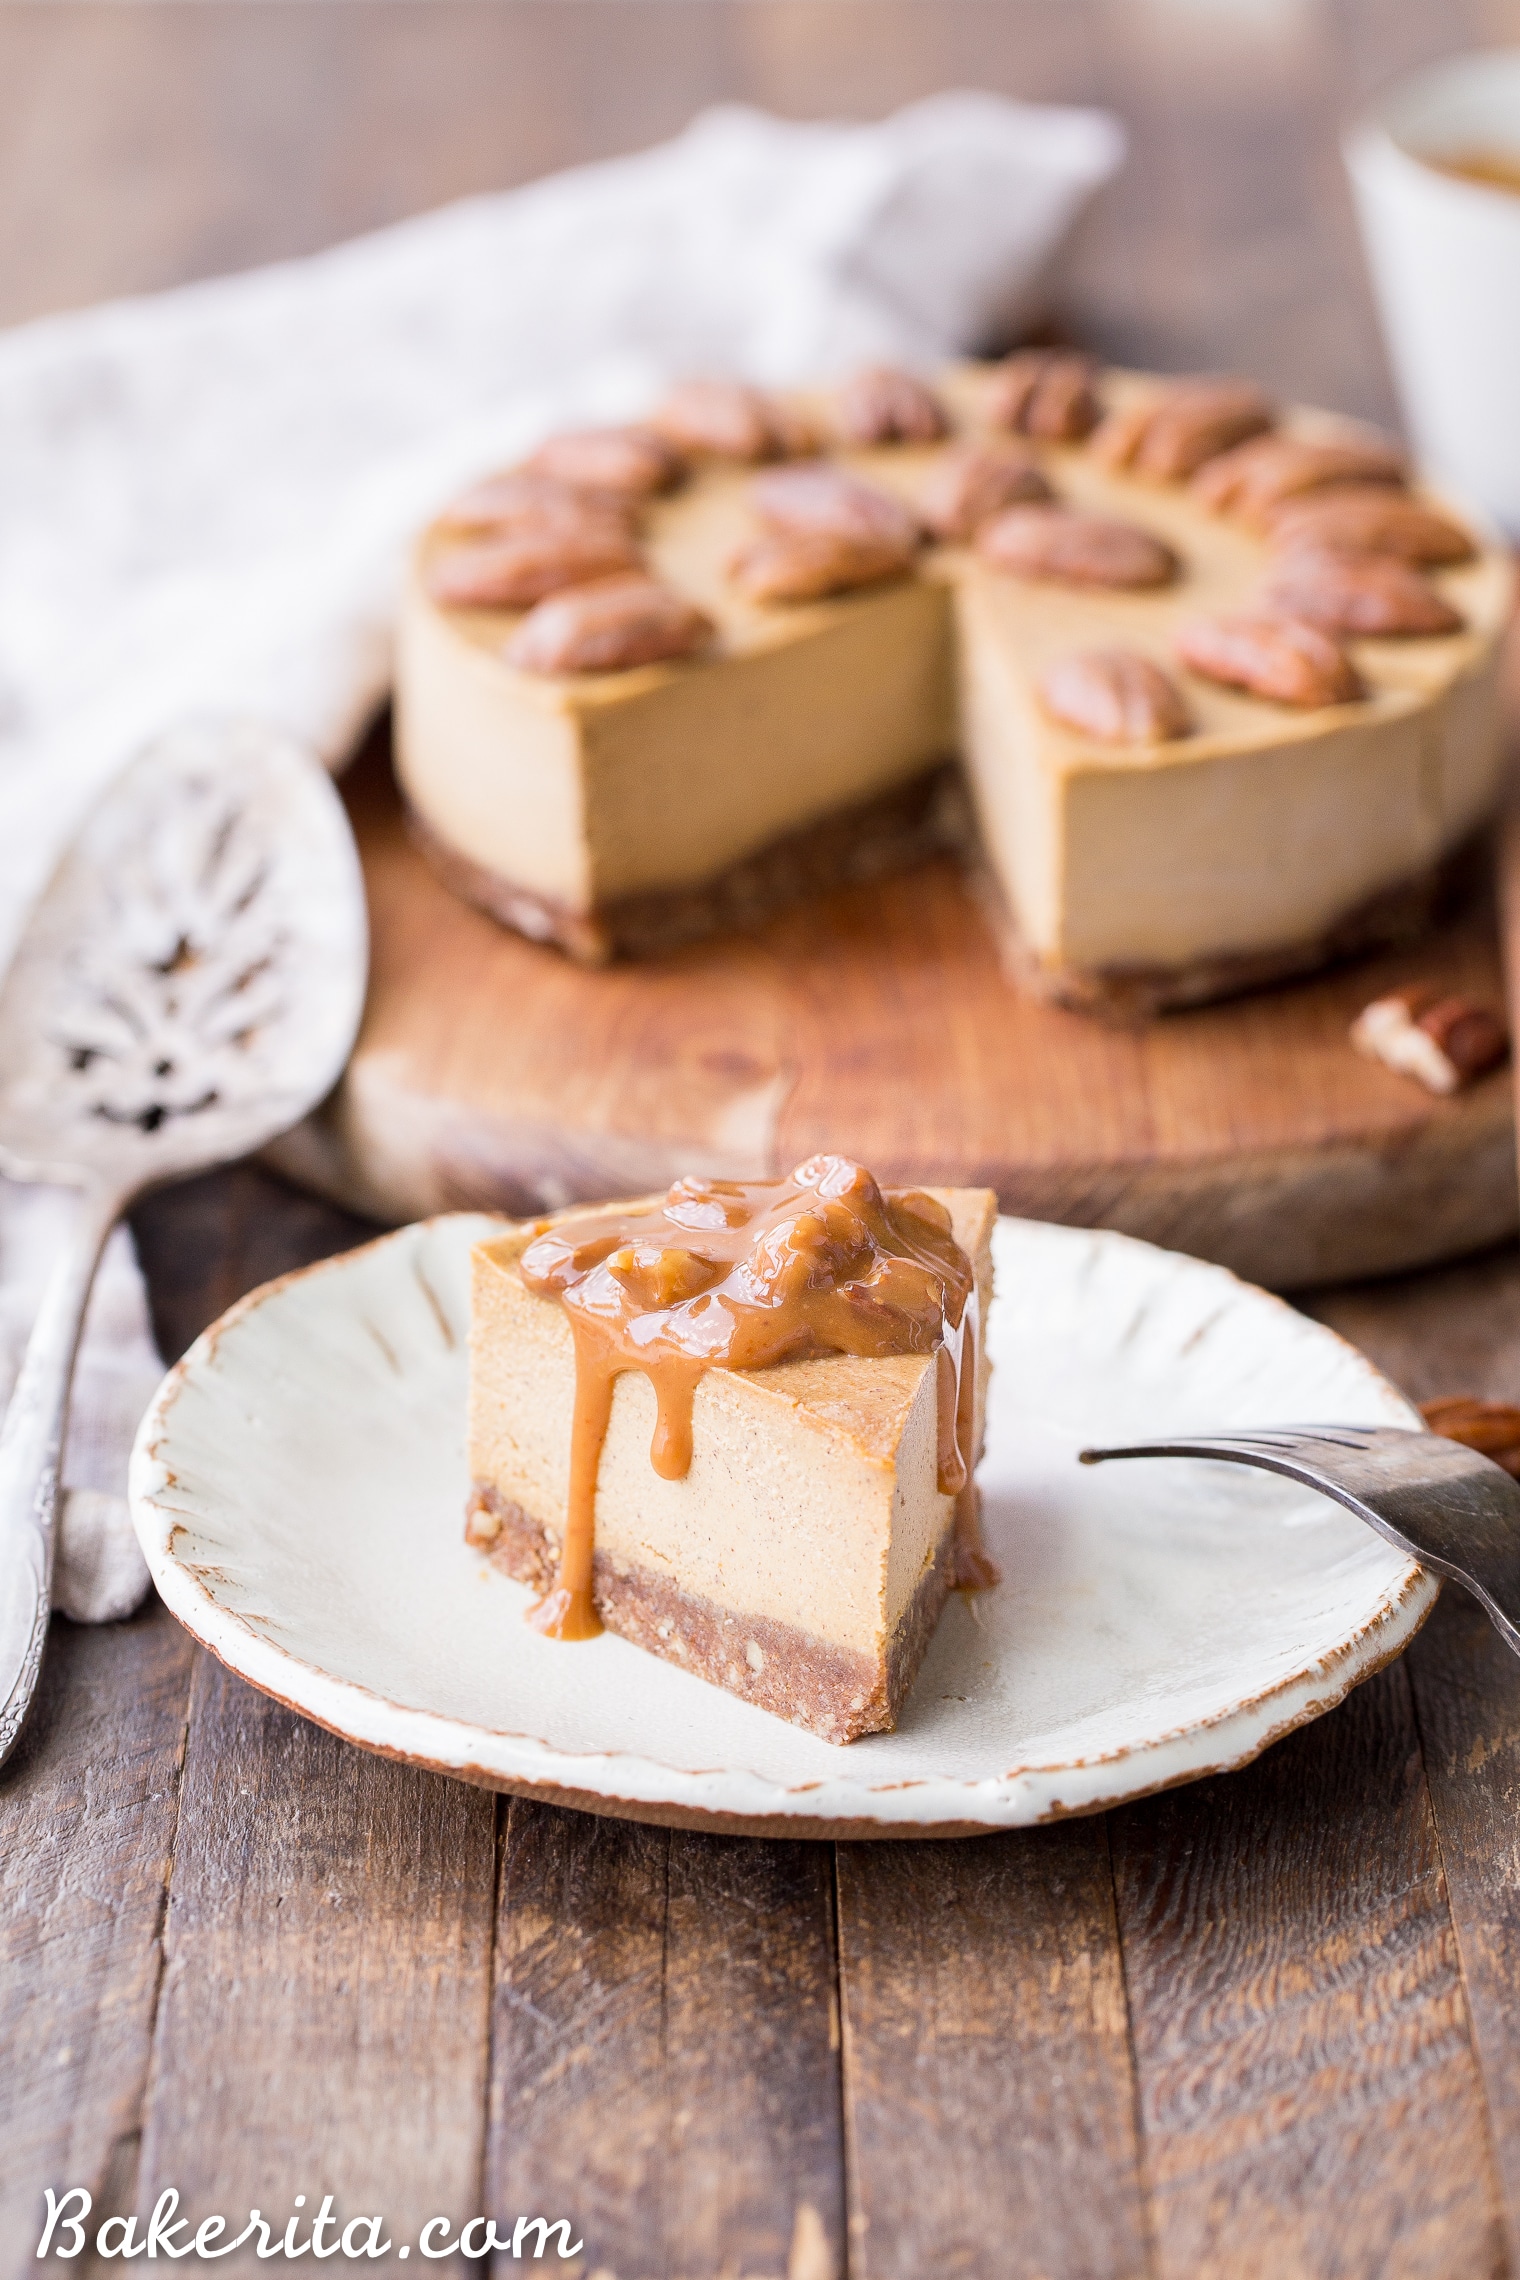 This No Bake Pumpkin Cheesecake is super creamy with a pecan crust and a spiced pumpkin cheesecake filling that's made with cashews! This healthier pumpkin cheesecake is gluten-free, dairy-free, paleo + vegan, and absolutely perfect for the holidays.